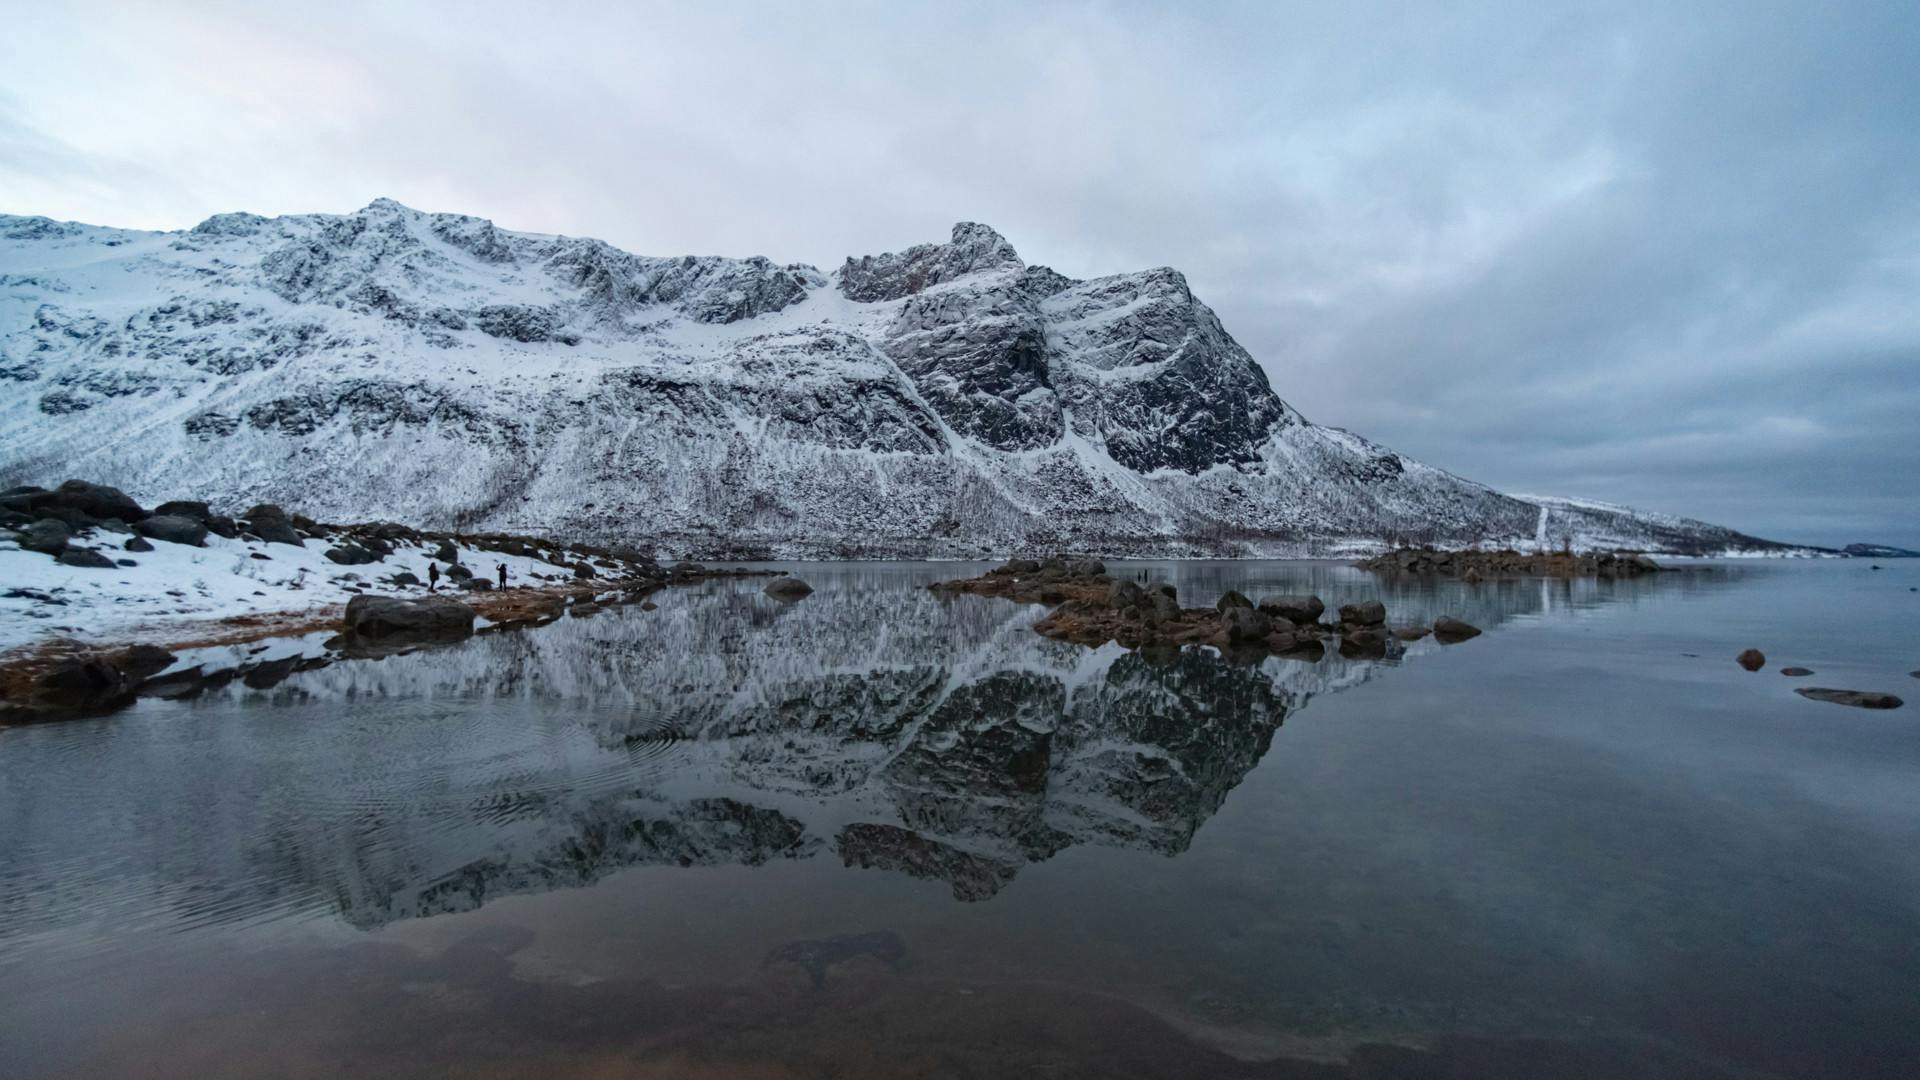 Arctic_landscapes_Wandering_Owl_fjord_reflections.jpg